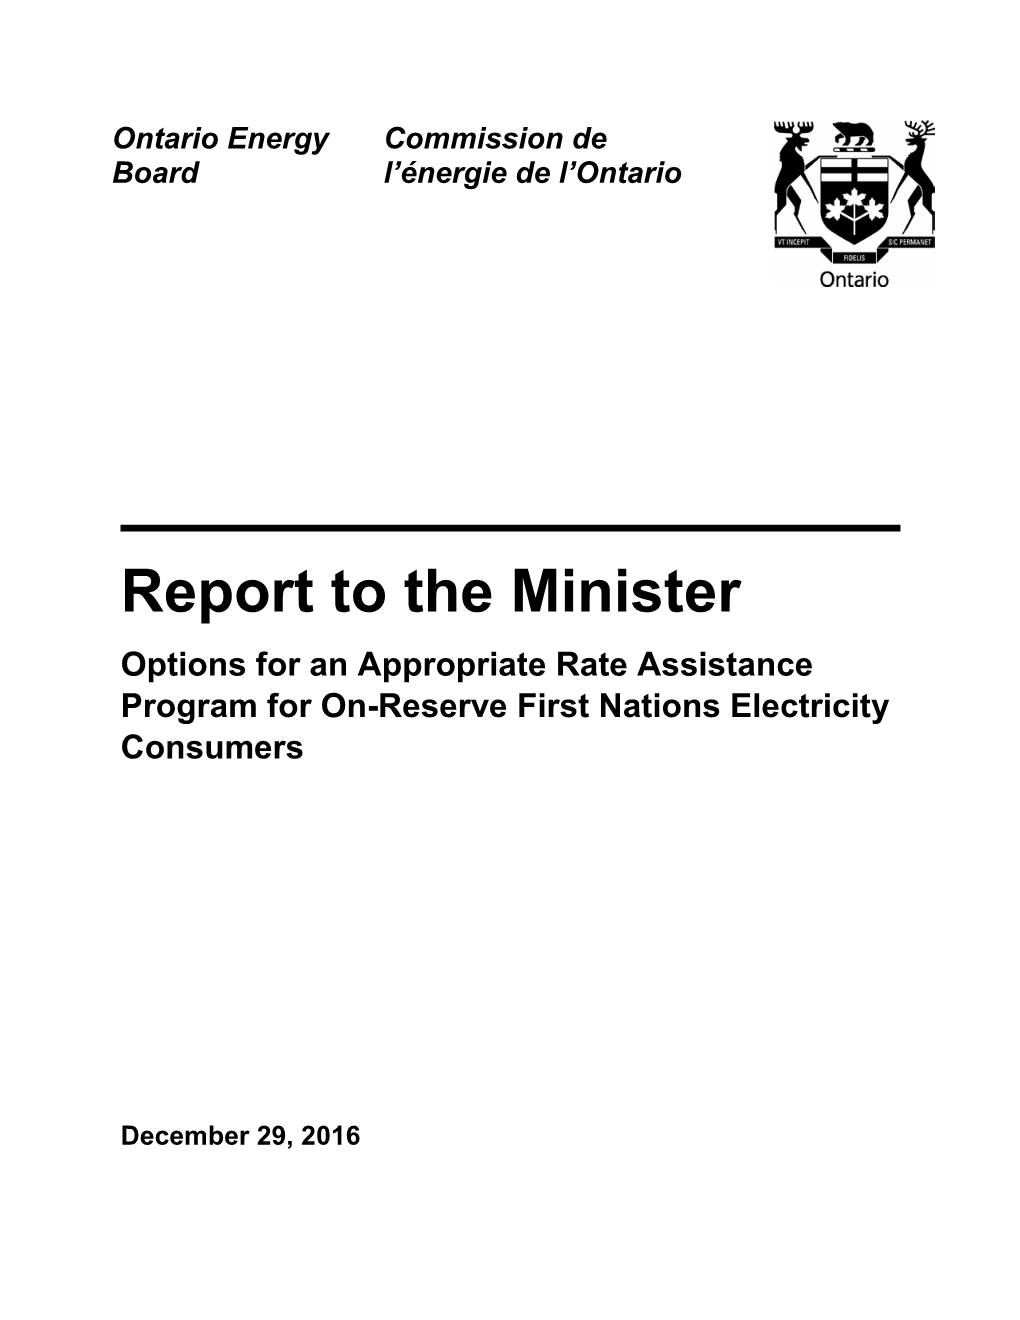 Report to the Minister Options for an Appropriate Rate Assistance Program for On-Reserve First Nations Electricity Consumers